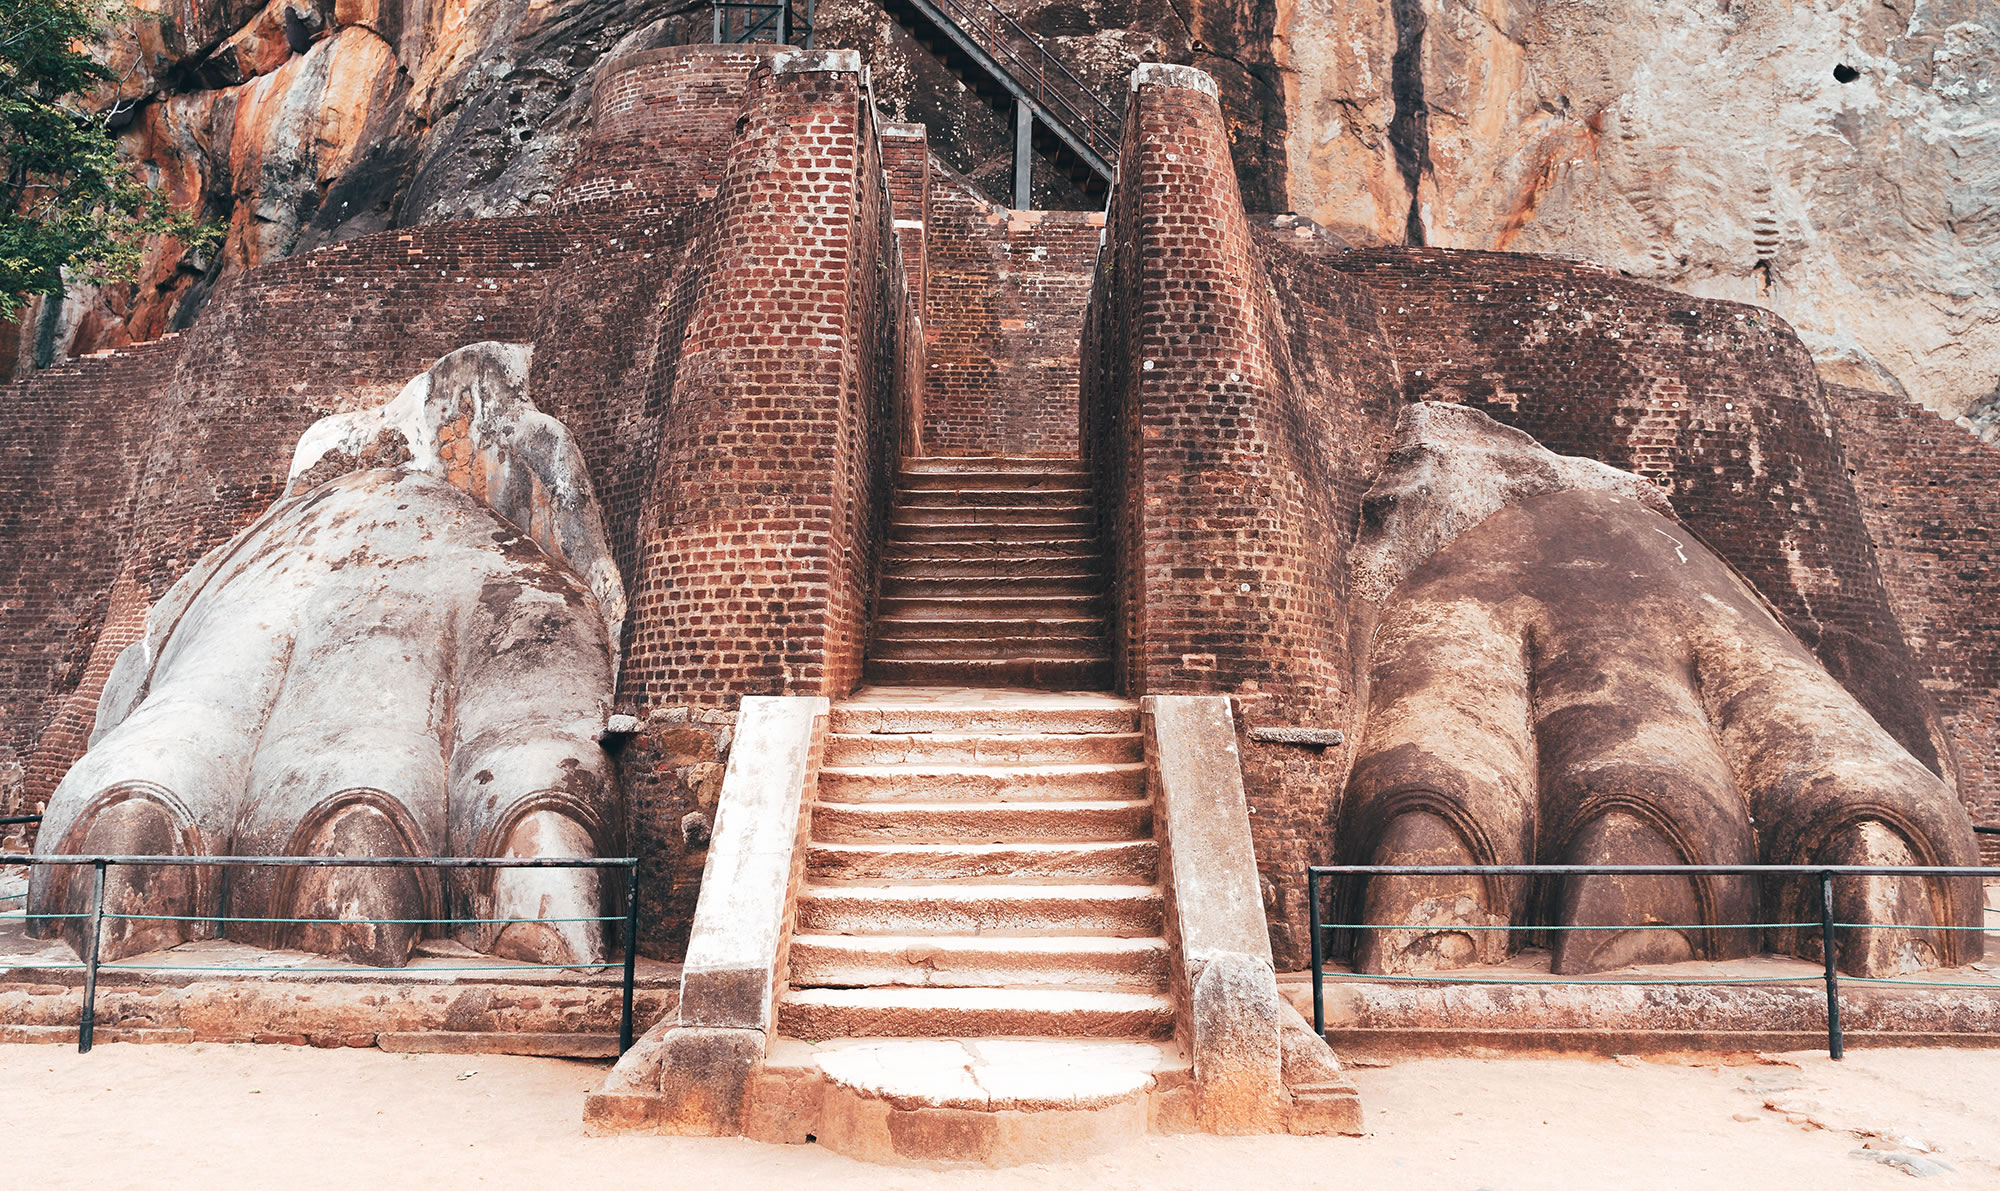 Stairs in the lion rock